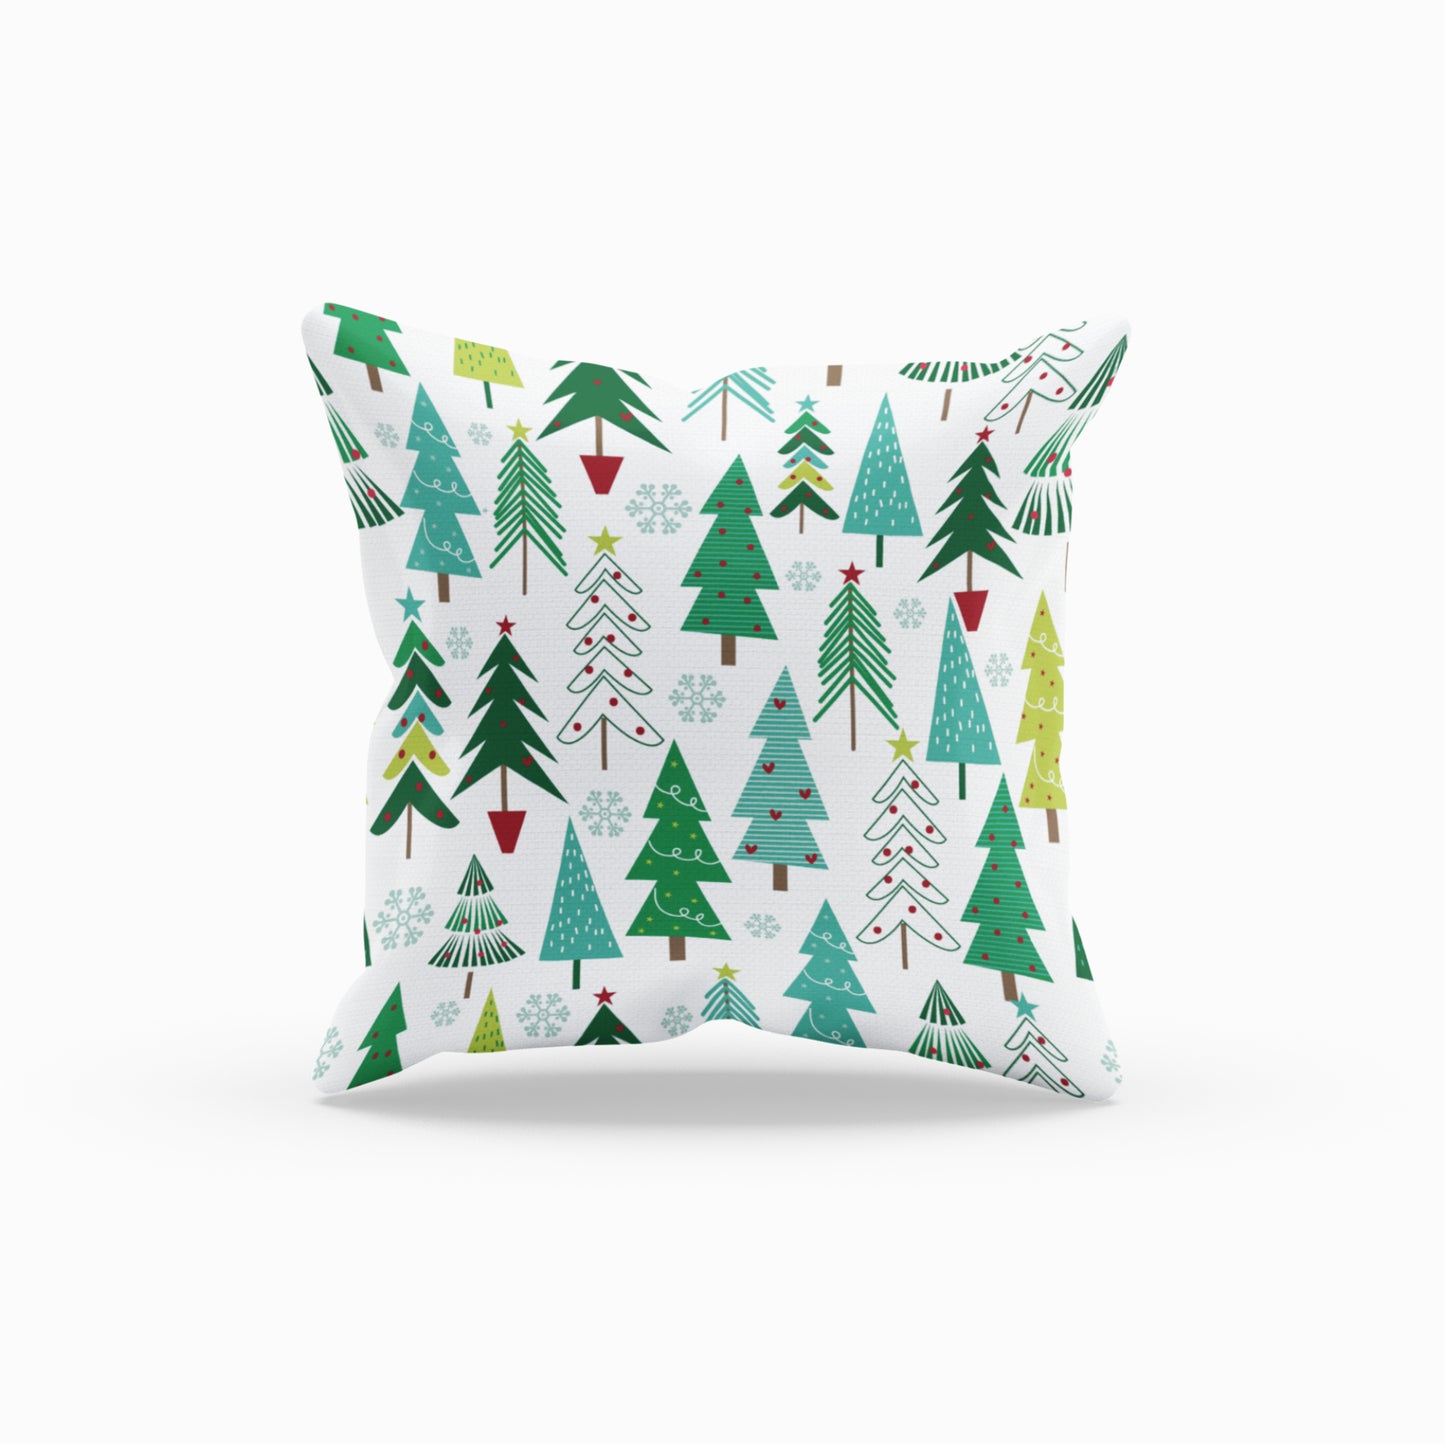 Pillow with Whimsical Christmas Tree Illustration